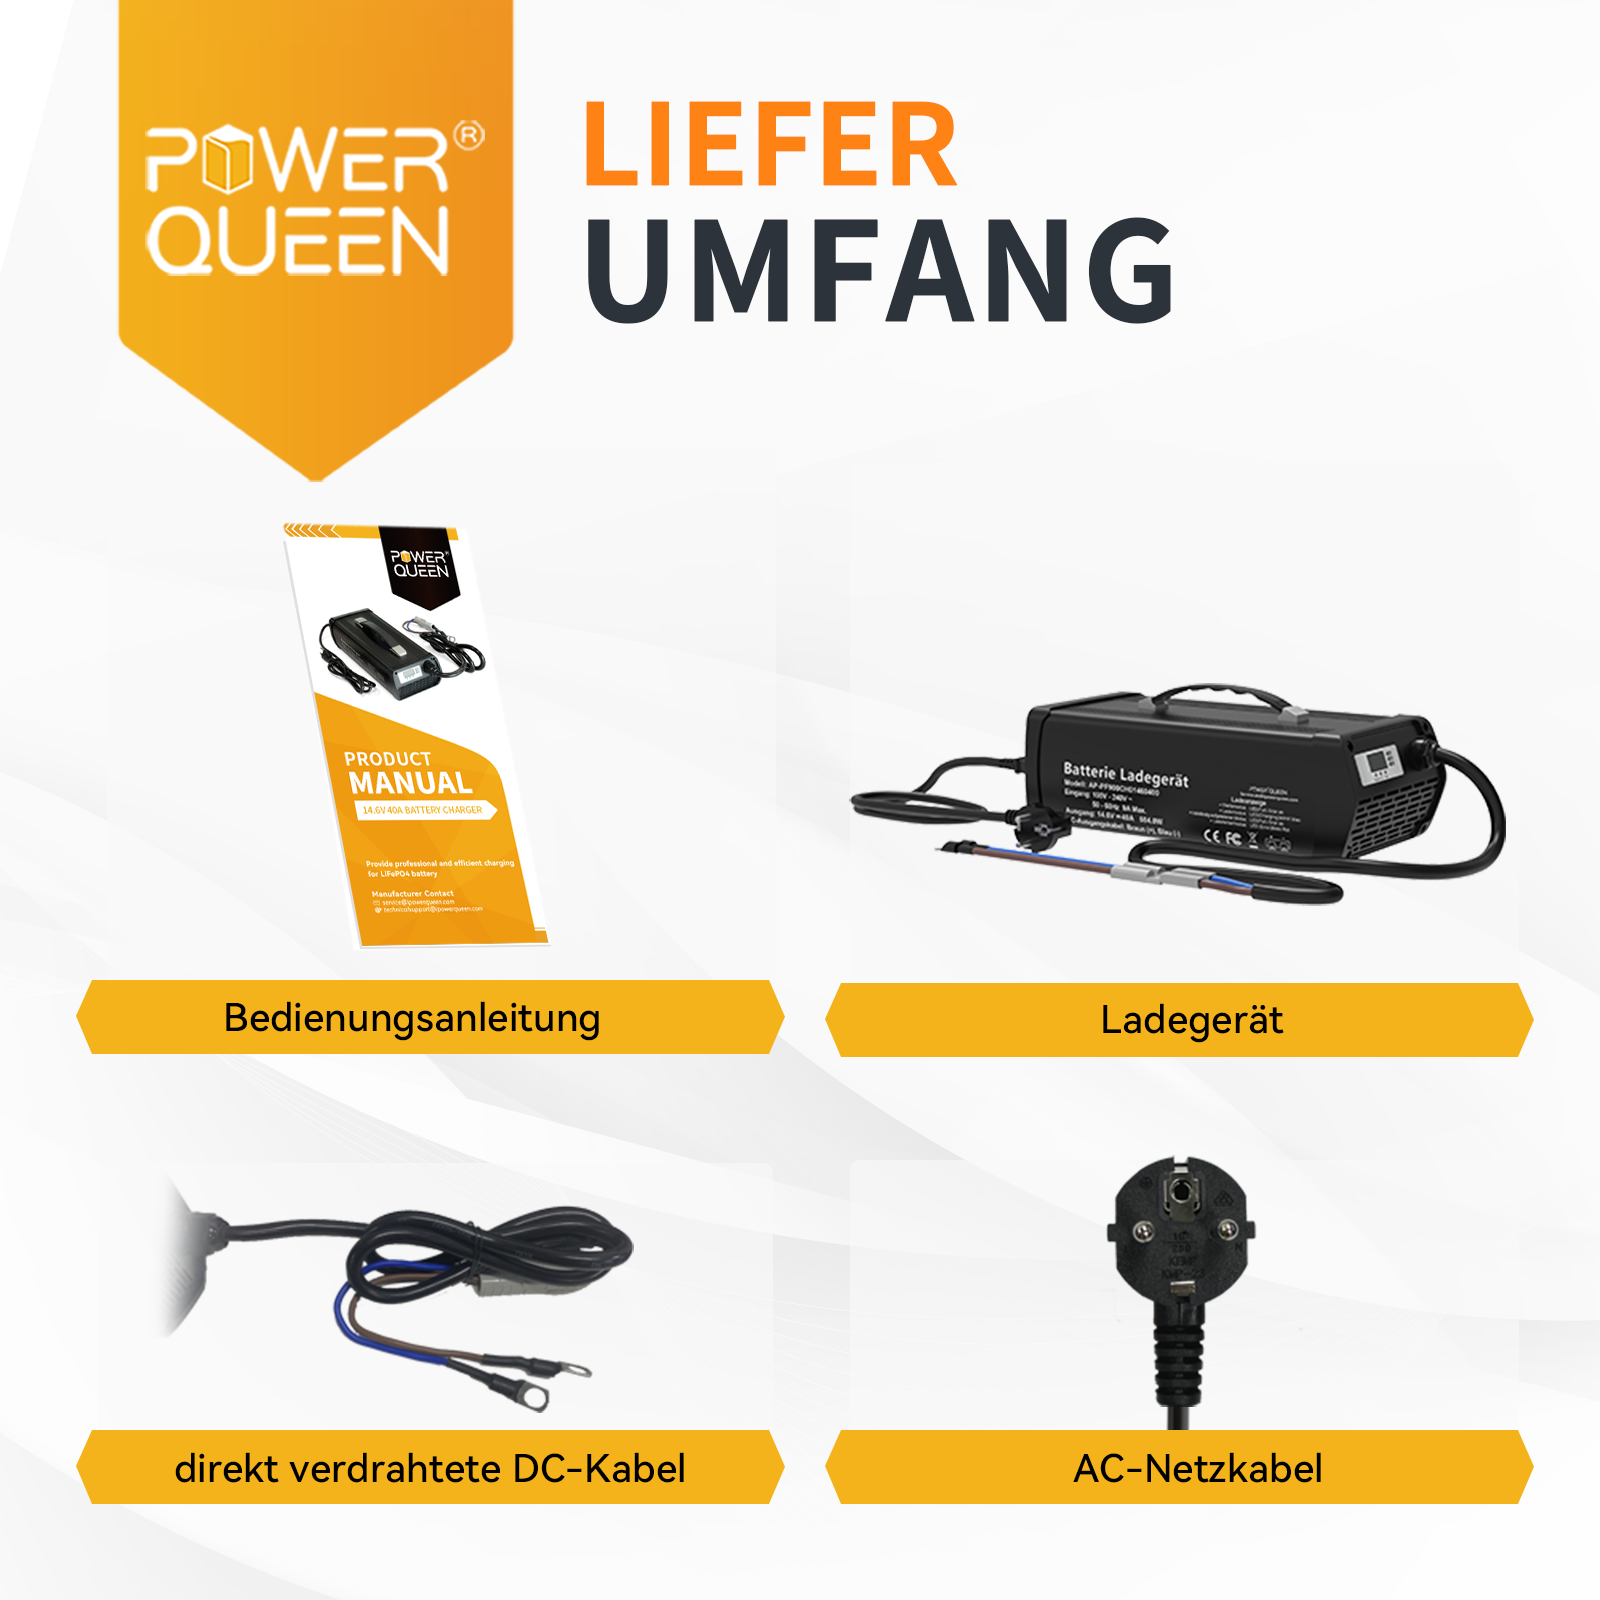 Power Queen 14.6V 40A LiFePO4 charger with handle for 12V LiFePO4 battery